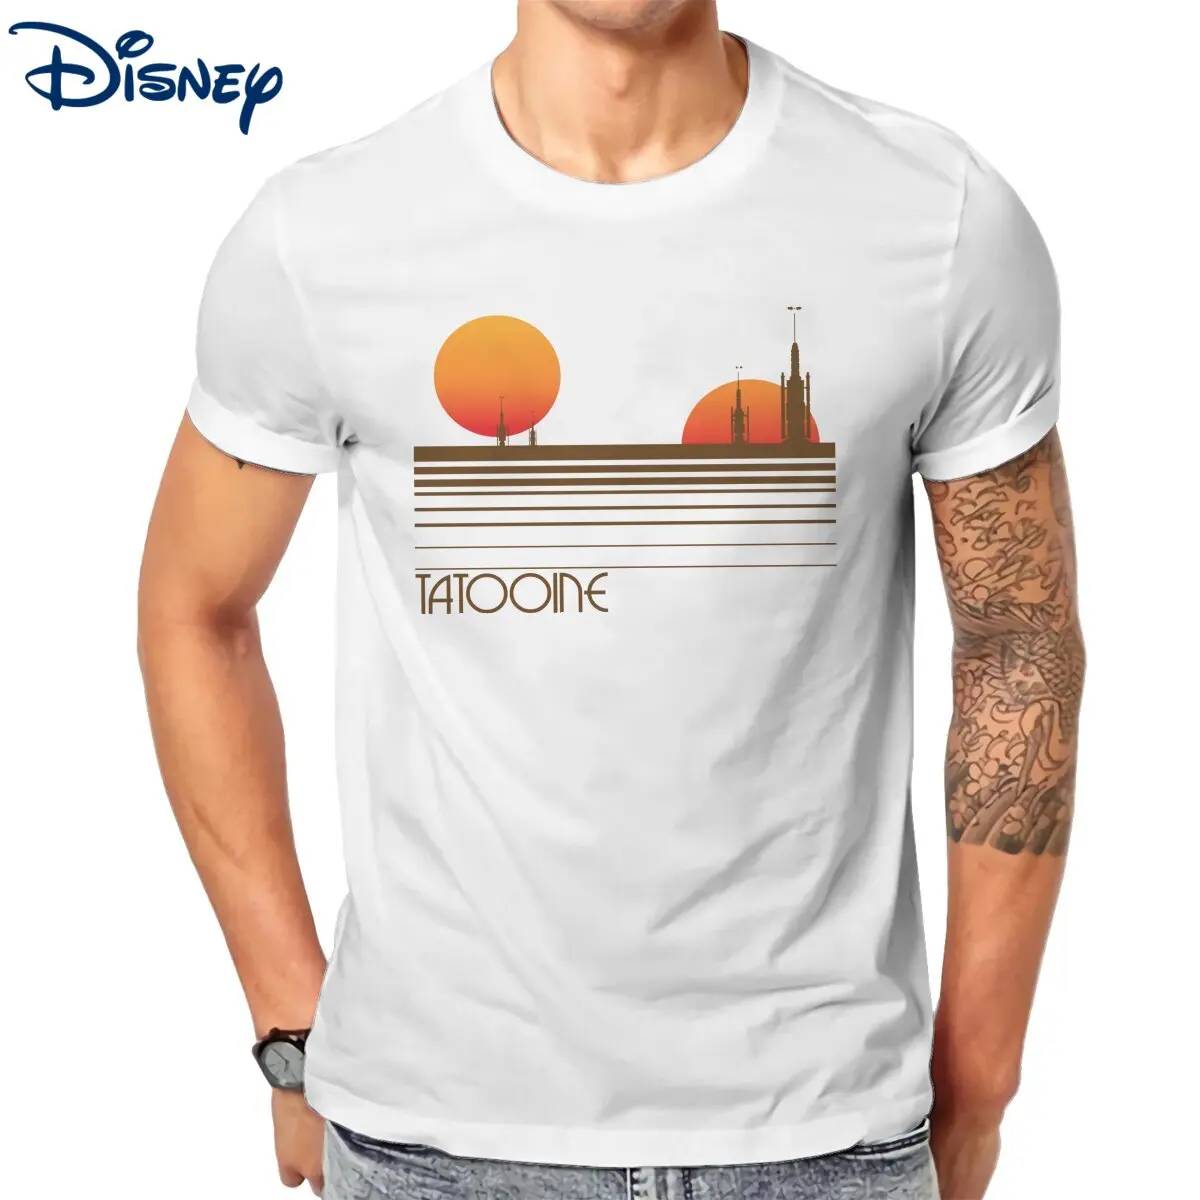 

Men's Disney Star Wars Visit Tatooine T Shirts Cotton Clothes Funny Short Sleeve Round Neck Tees Gift Idea T-Shirts